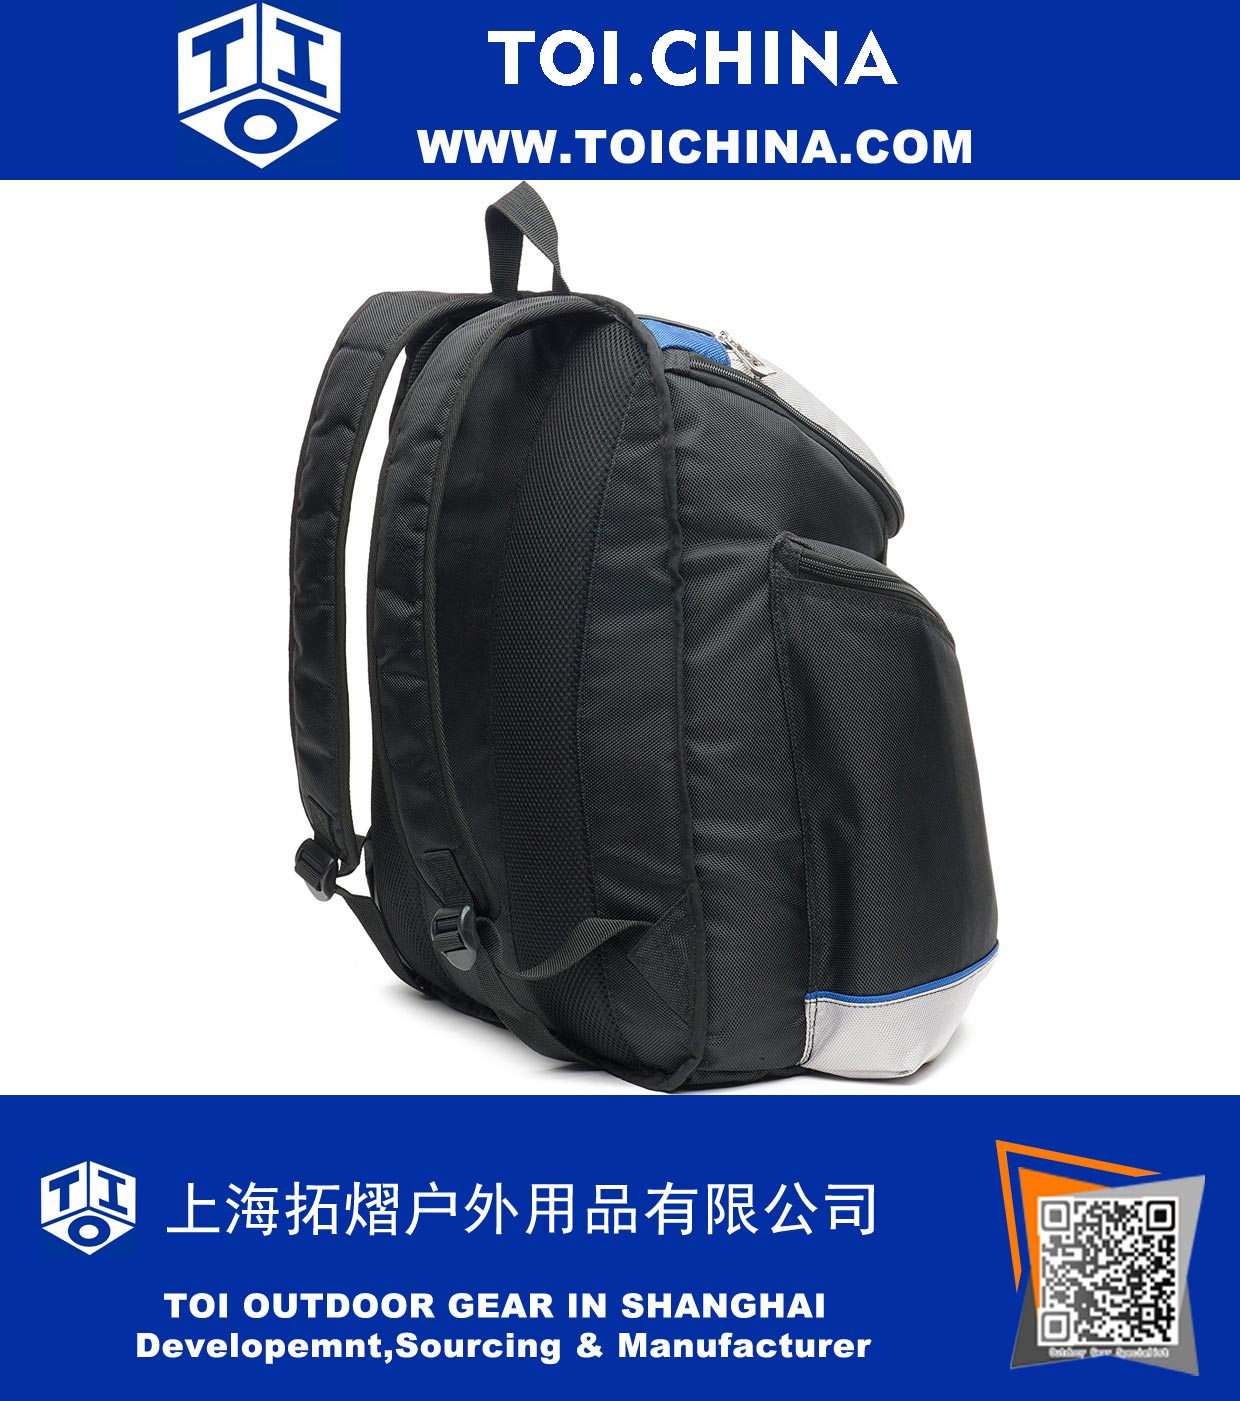 Cooler Backpack Made of Heavy Duty 1680D Tear Resistent Fabric, High Density Thick Foam Insulation, Heat Sealed Removable Thick Peva Liner, Large Padded Pockets and Strong Zippers and Stitching